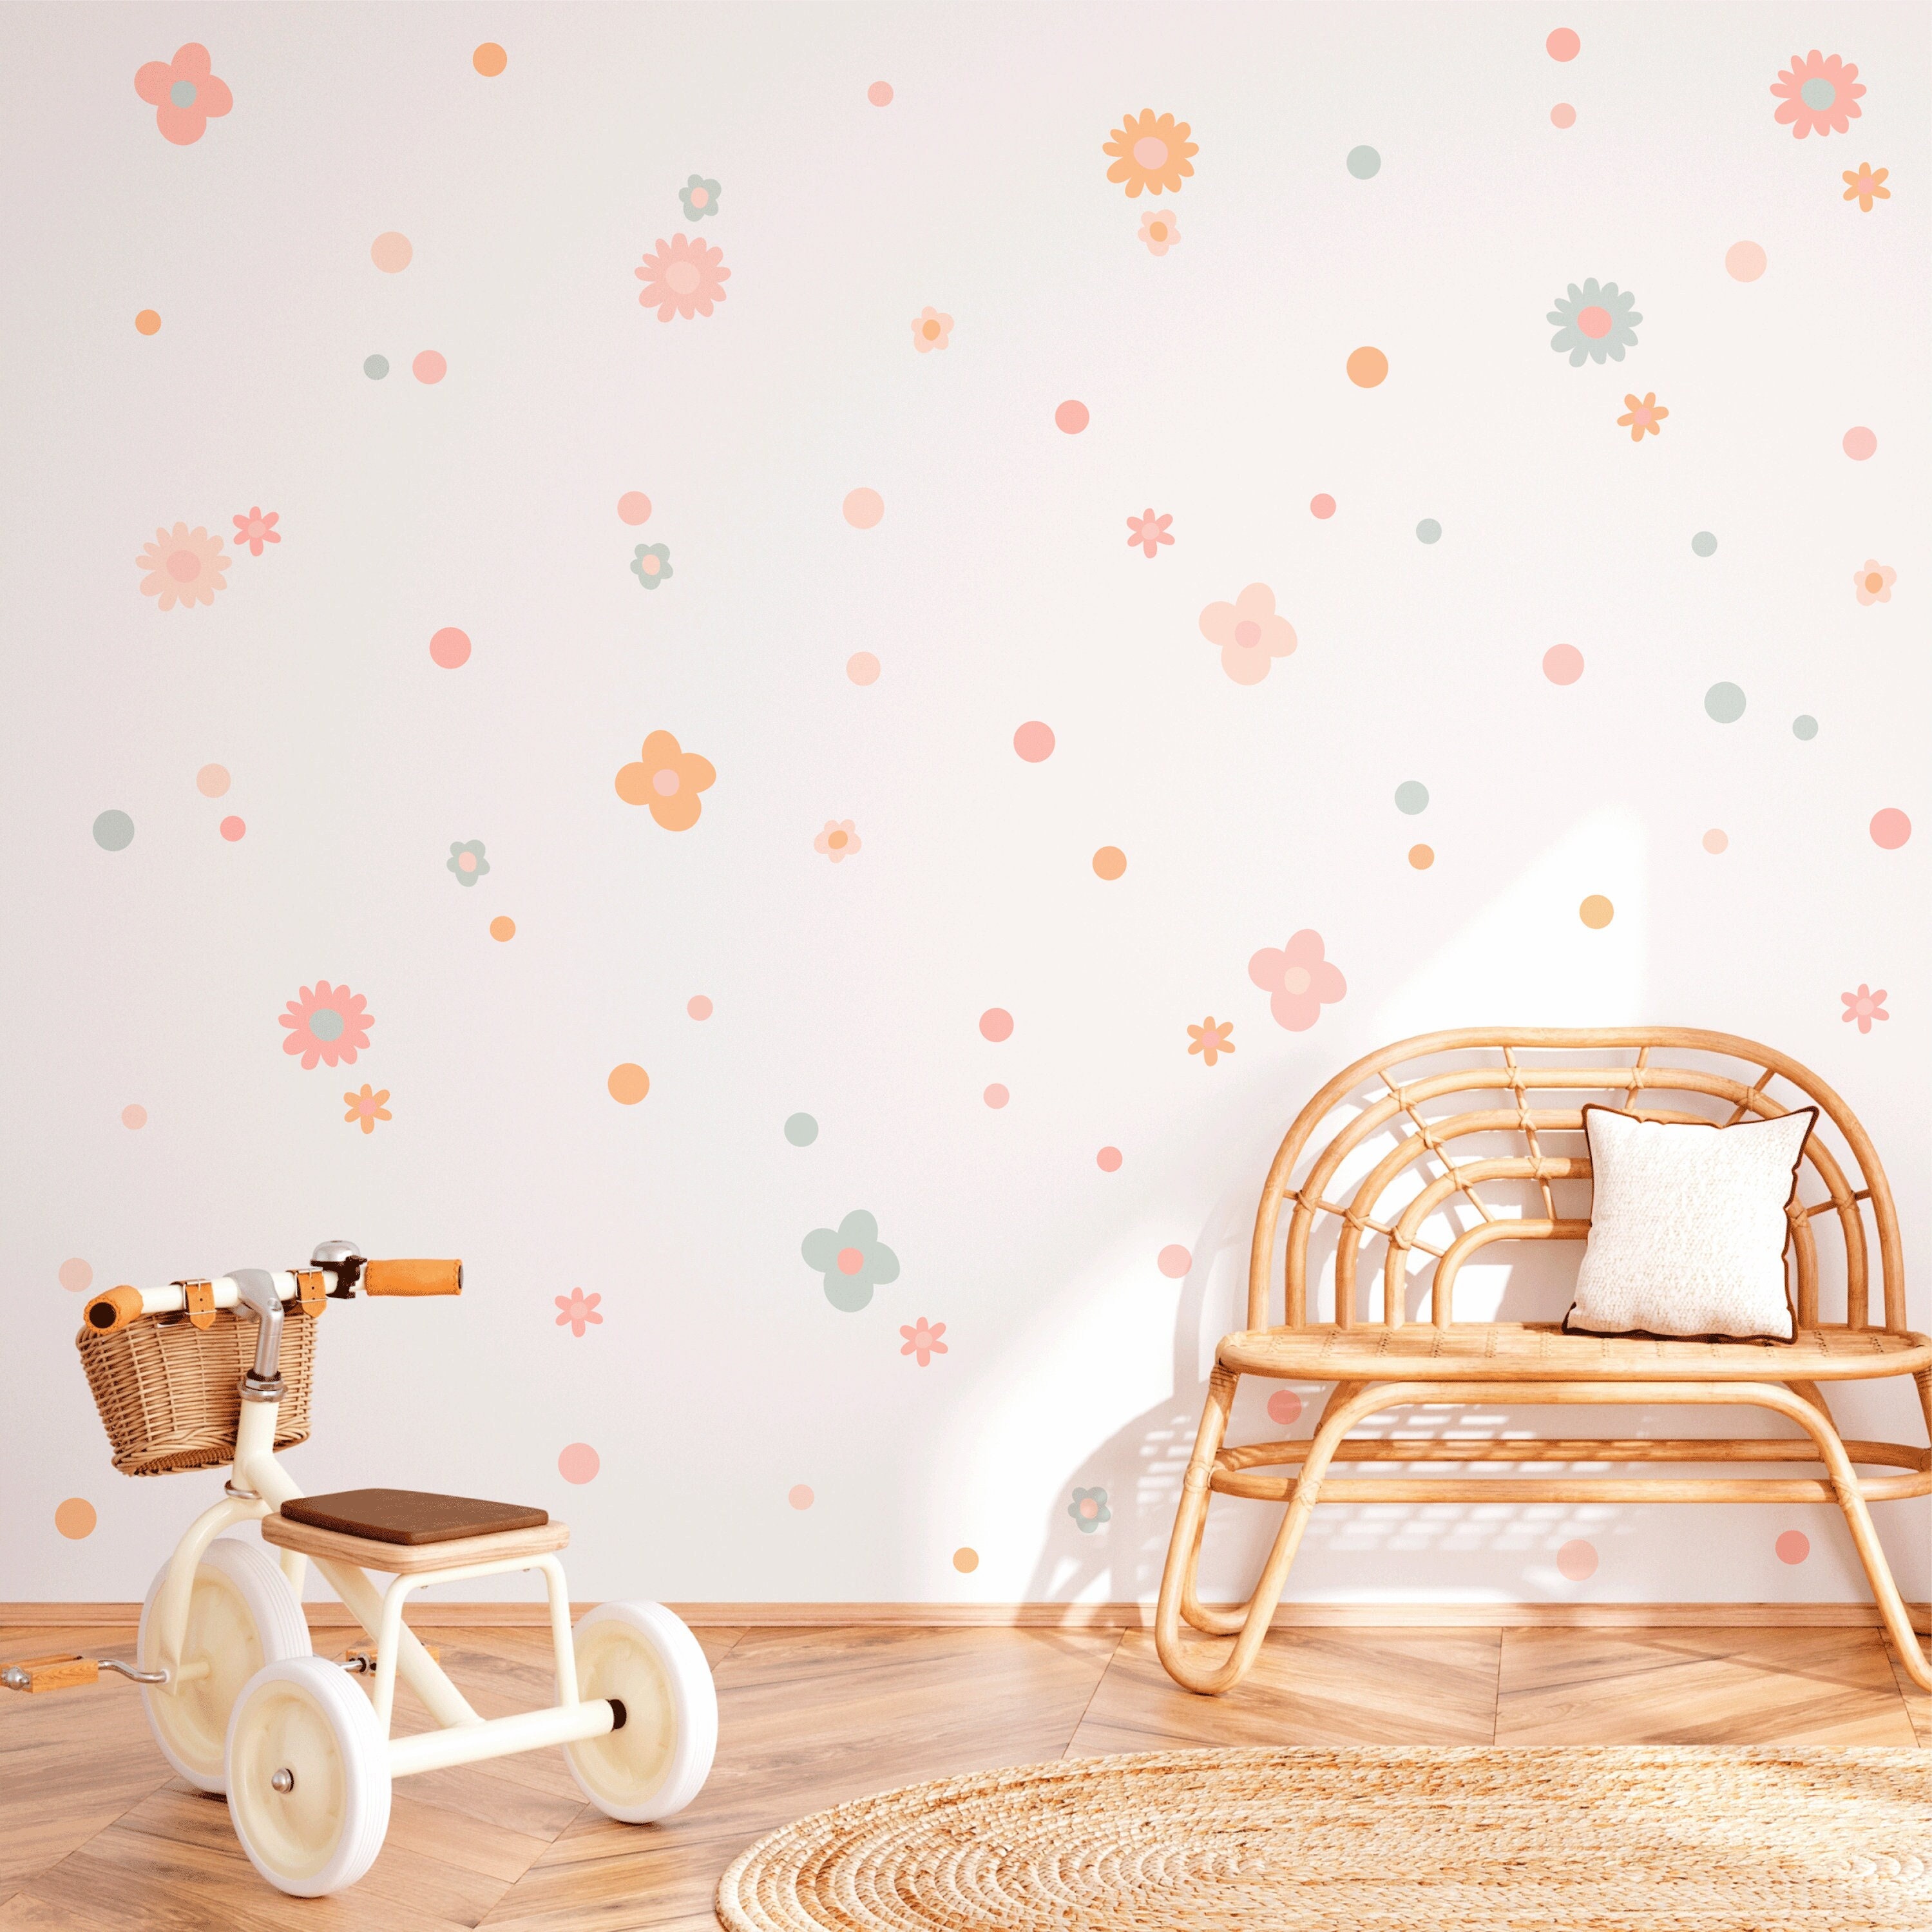 Floral Wall Decals, Flower Decals, Nursery Wall Decals, Flower Wall Stickers,  Pink Girls Wall Decals, Wall Stickers, Wall Murals, Nursery 